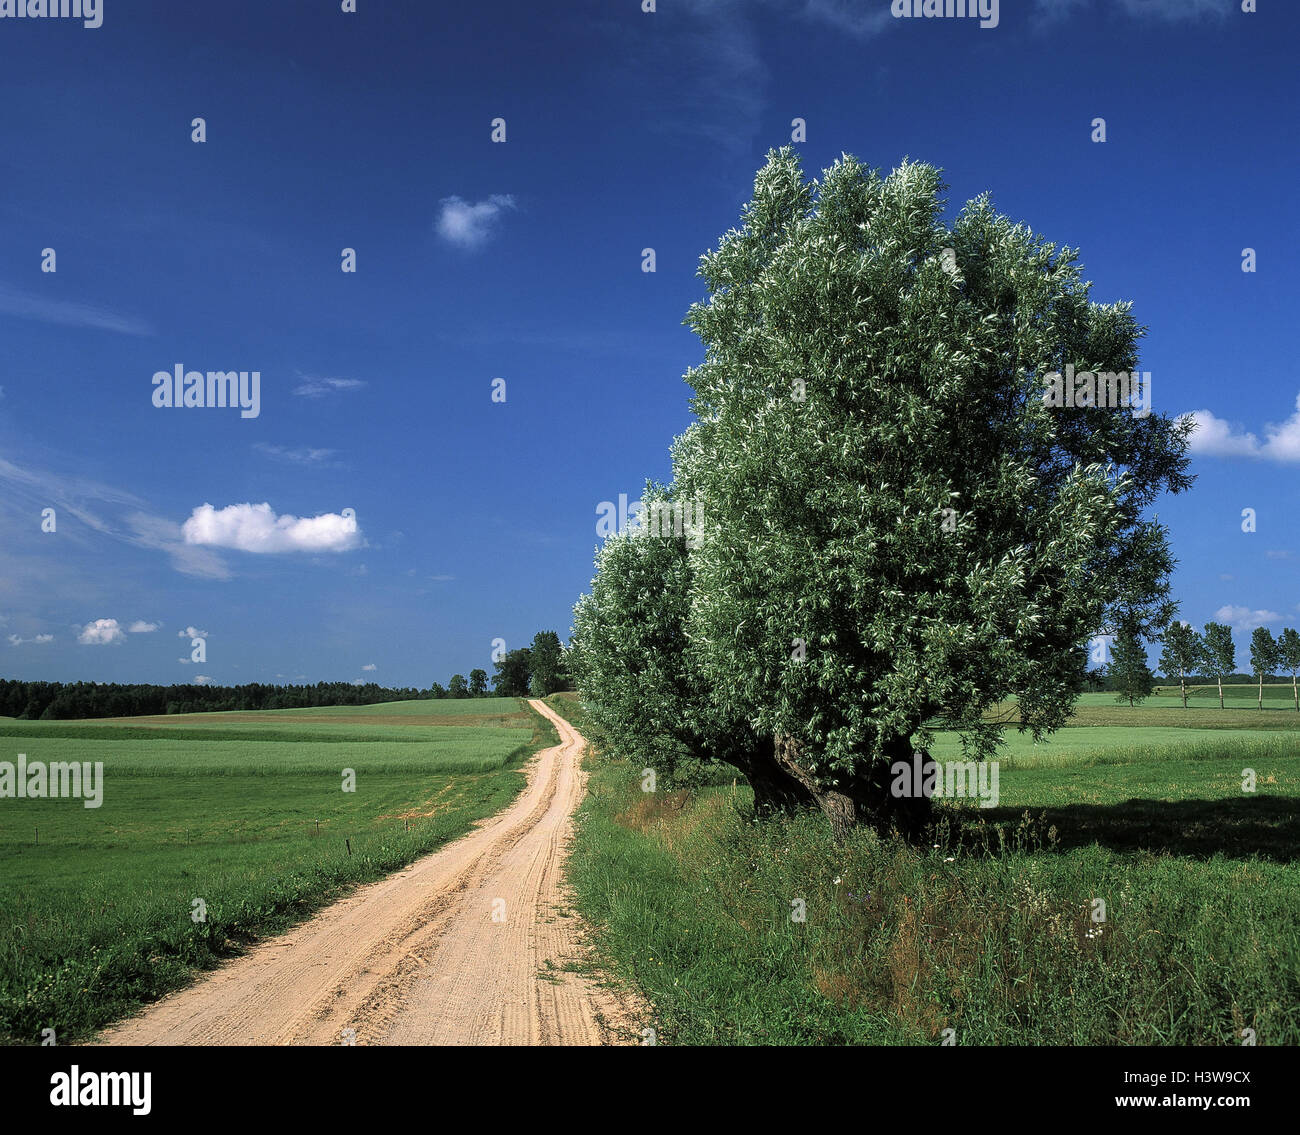 Poland, Masuria, country lane, trees, meadow, Europe, Mazury, formerly East Prussia, terminal moraine scenery, ground moraine scenery, nature, scenery, trees, broad-leaved trees, field, fields, way, summer Stock Photo